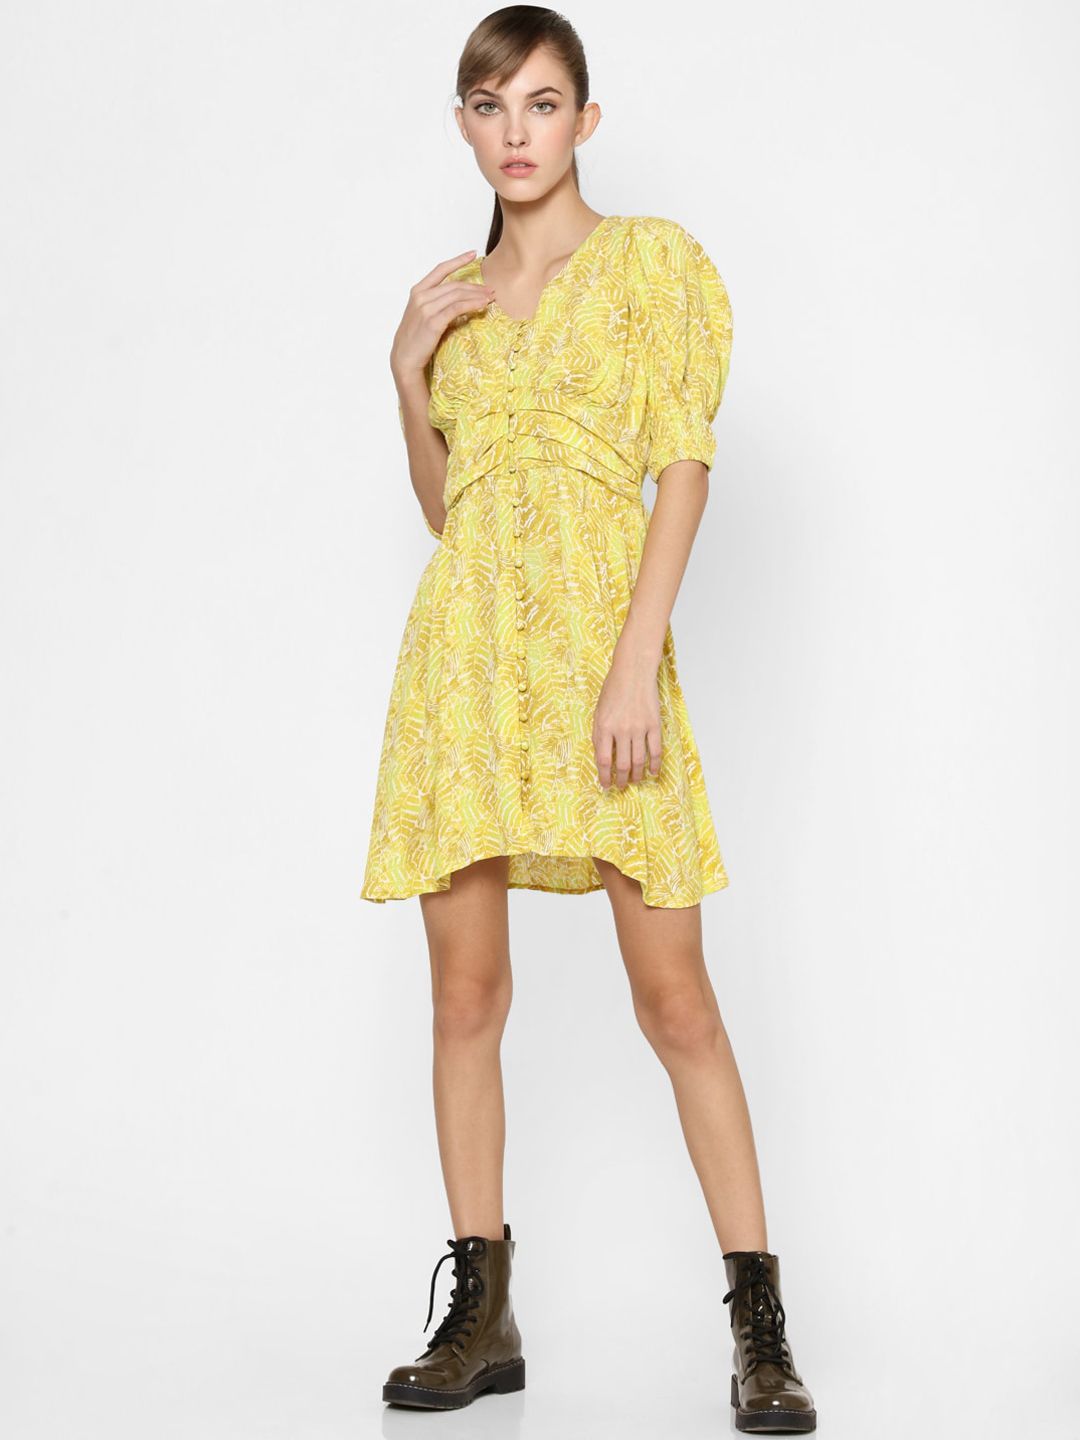 ONLY Women Yellow Floral Dress Price in India